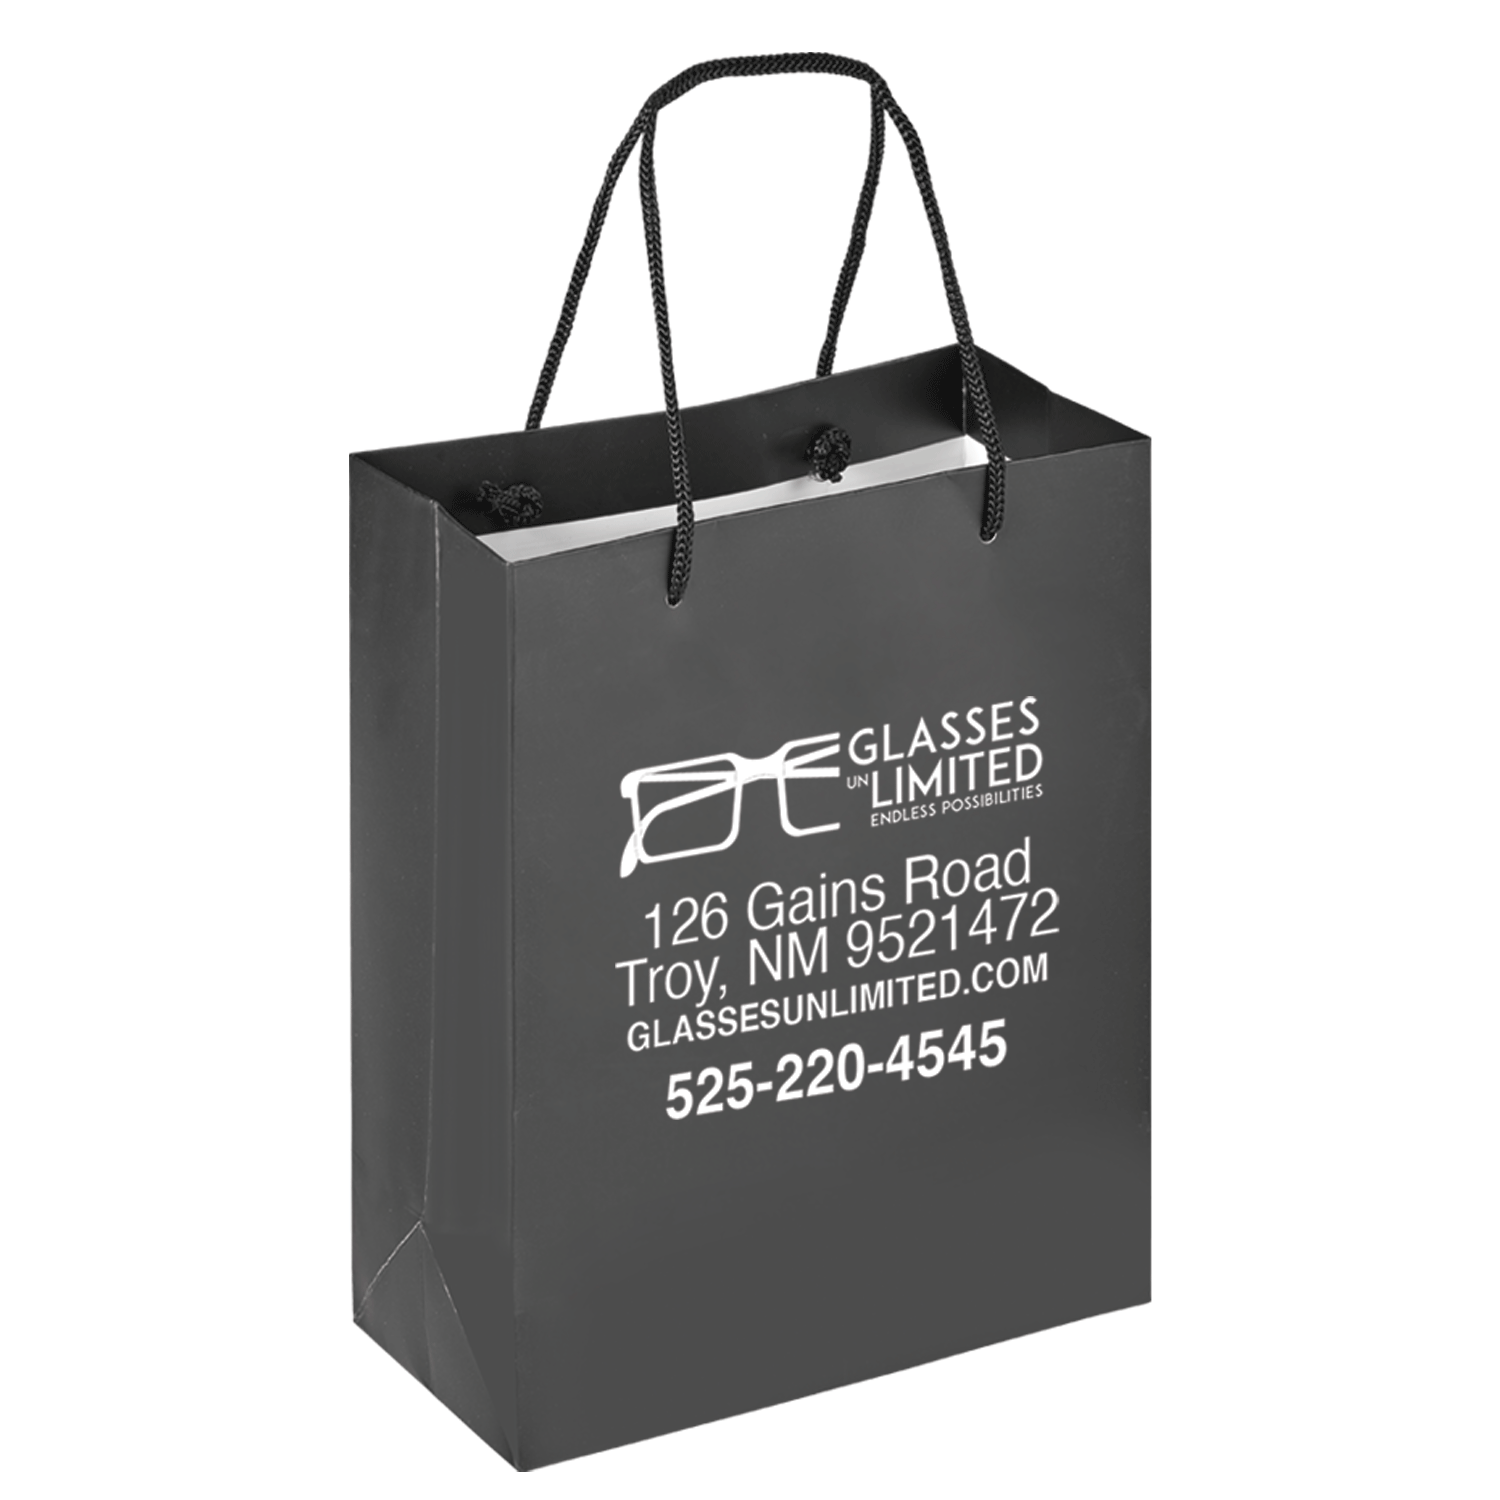 Boutique Imprinted Shopping Bags - Laminated (Large) [Min. Order Qty: 500 Bags]